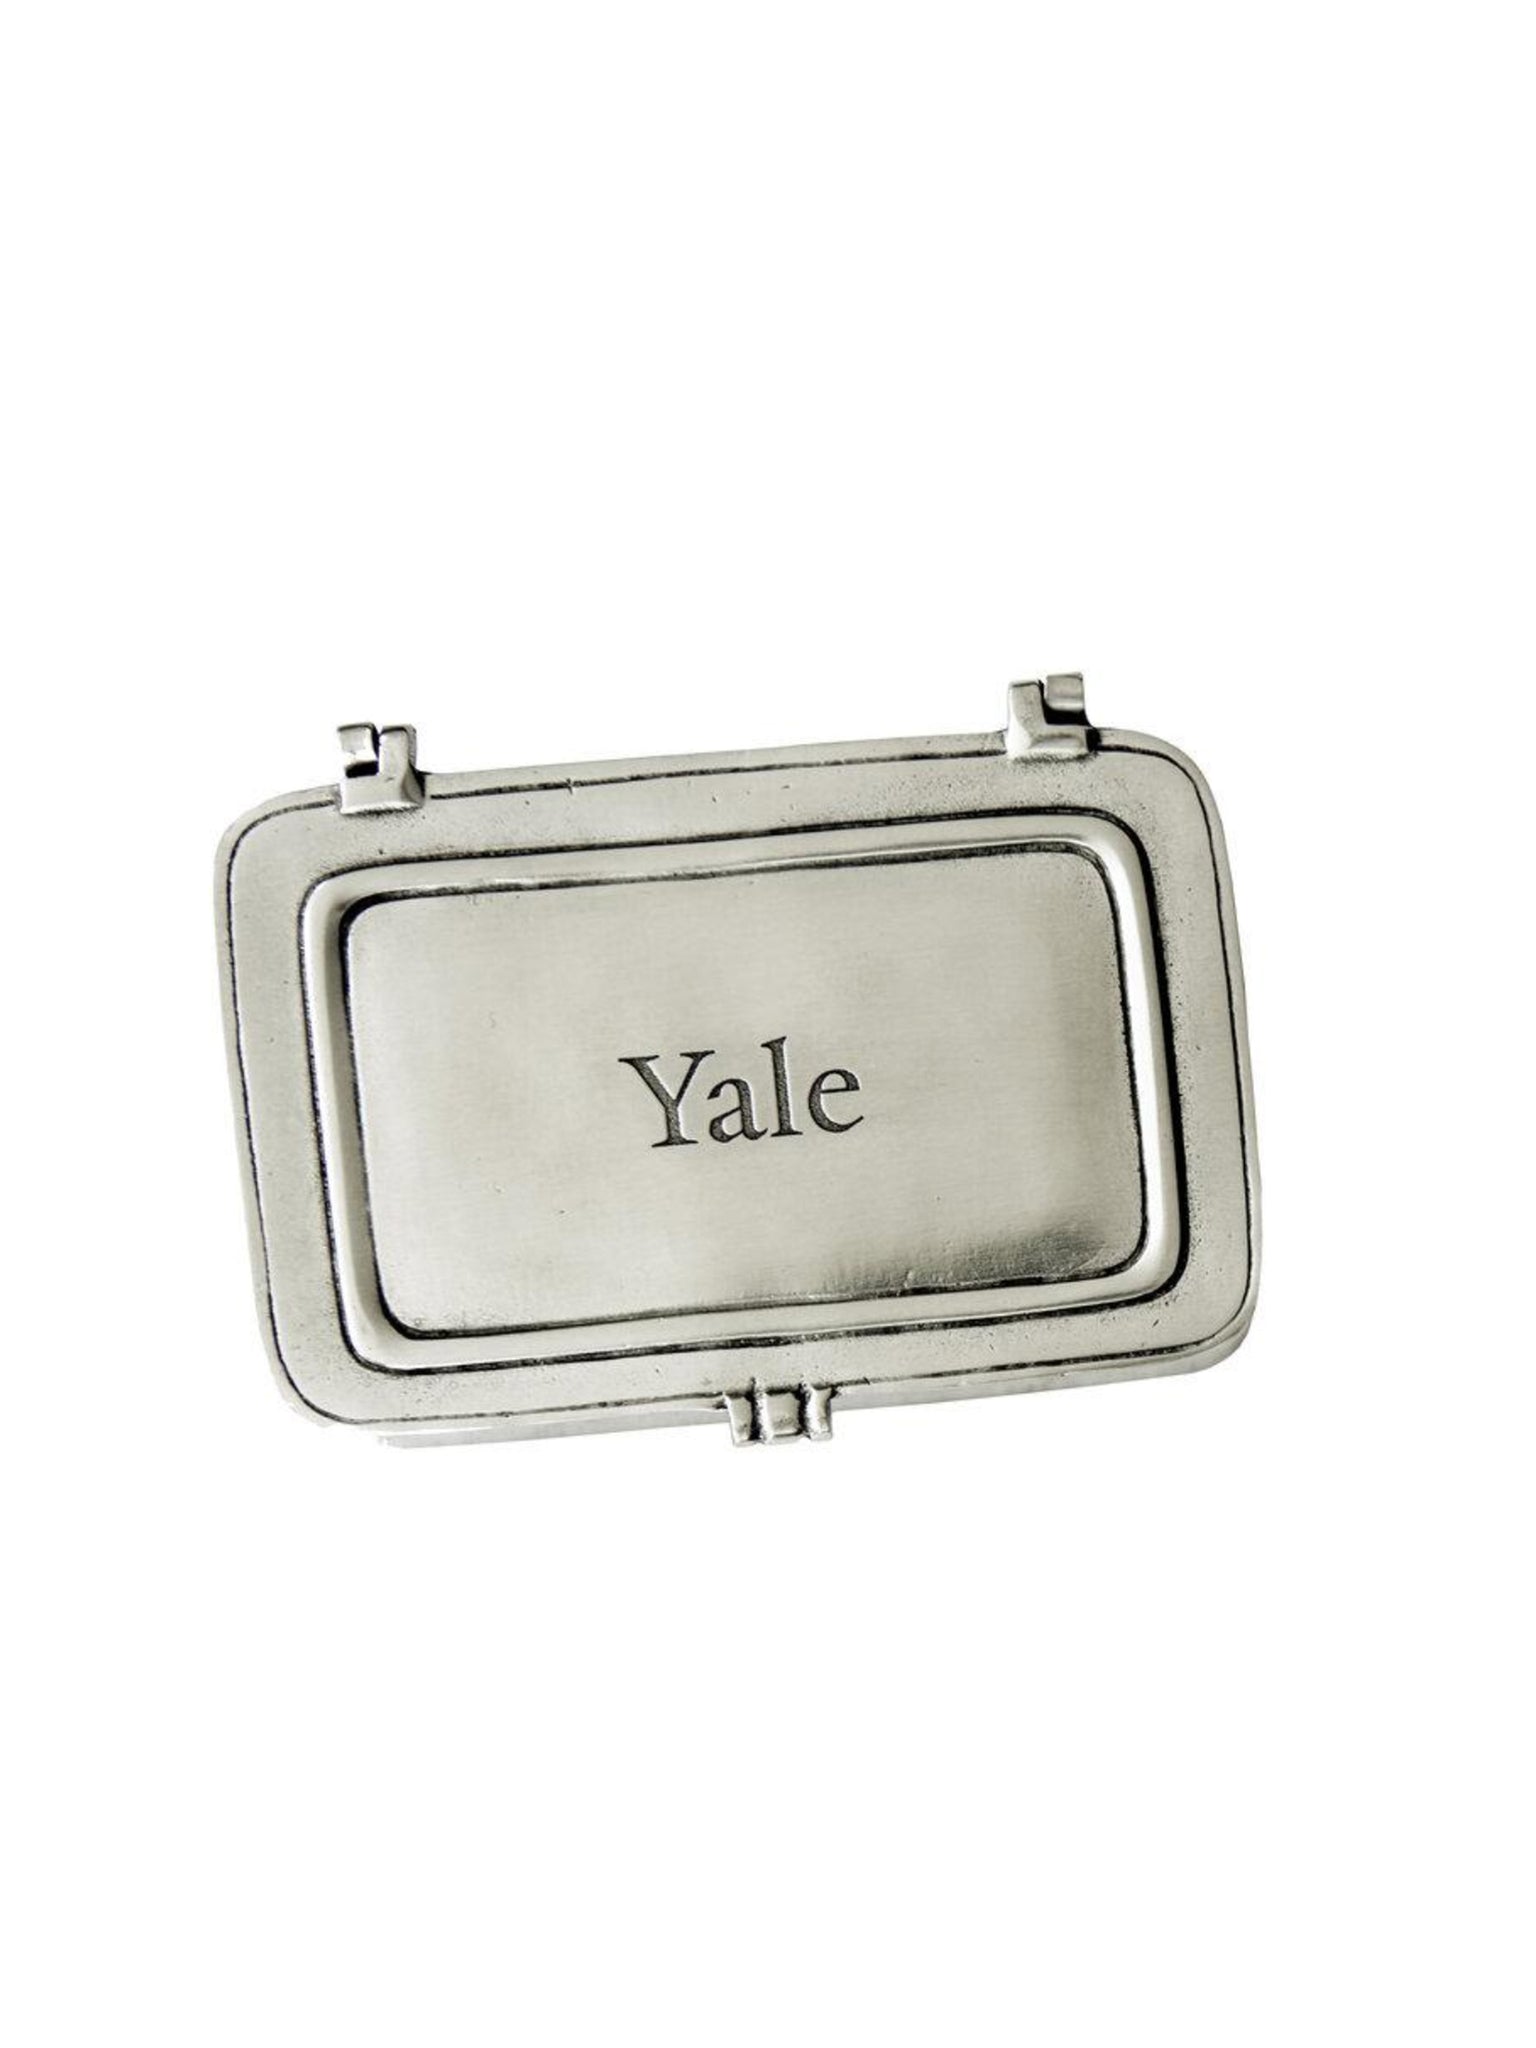 MATCH Pewter Yale Collegiate Box Weston Table